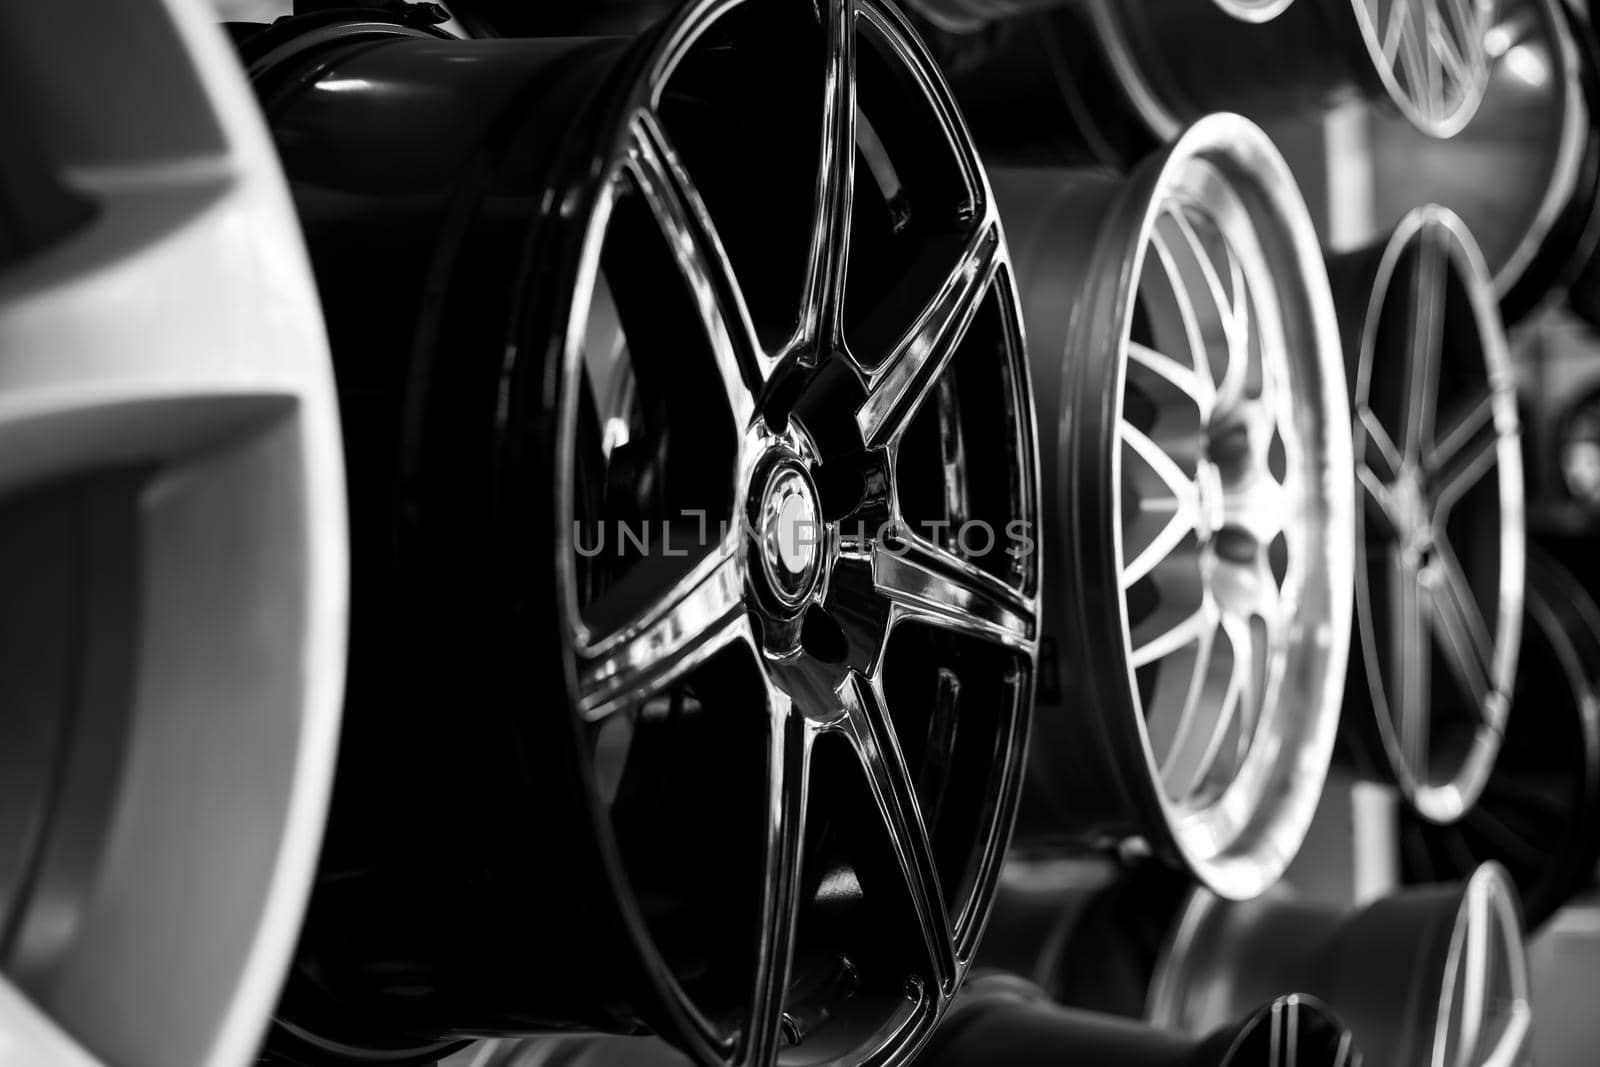 Showcase with disks of different configurations. Sale of disks and alloy wheels.